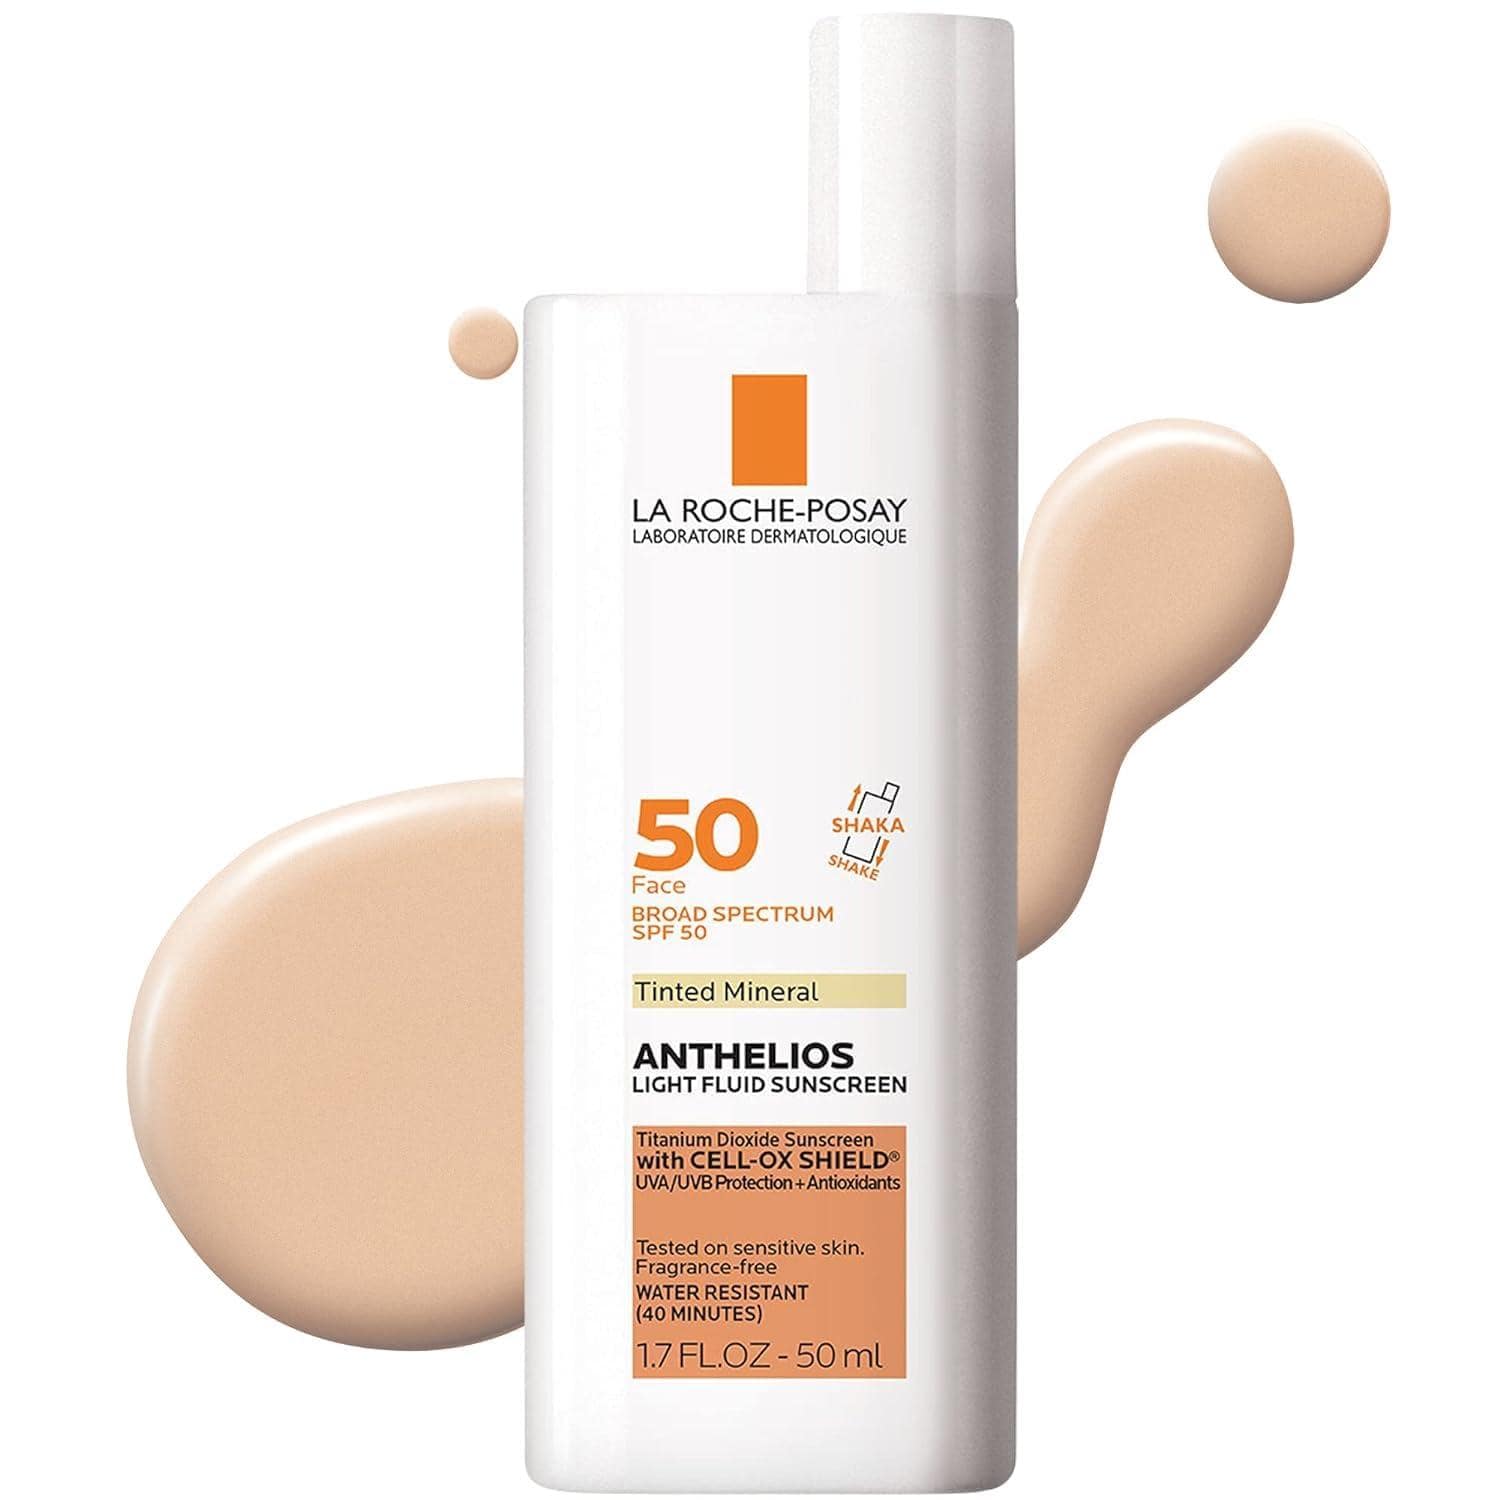 La Roche Posay's Anthelios Mineral Sunscreen, recommended by Dr. Lankerani, is my SPF 50 hero. Its thin, non-greasy formula ensures quick absorption, perfect for flawless makeup. Sunscreen for oily skin